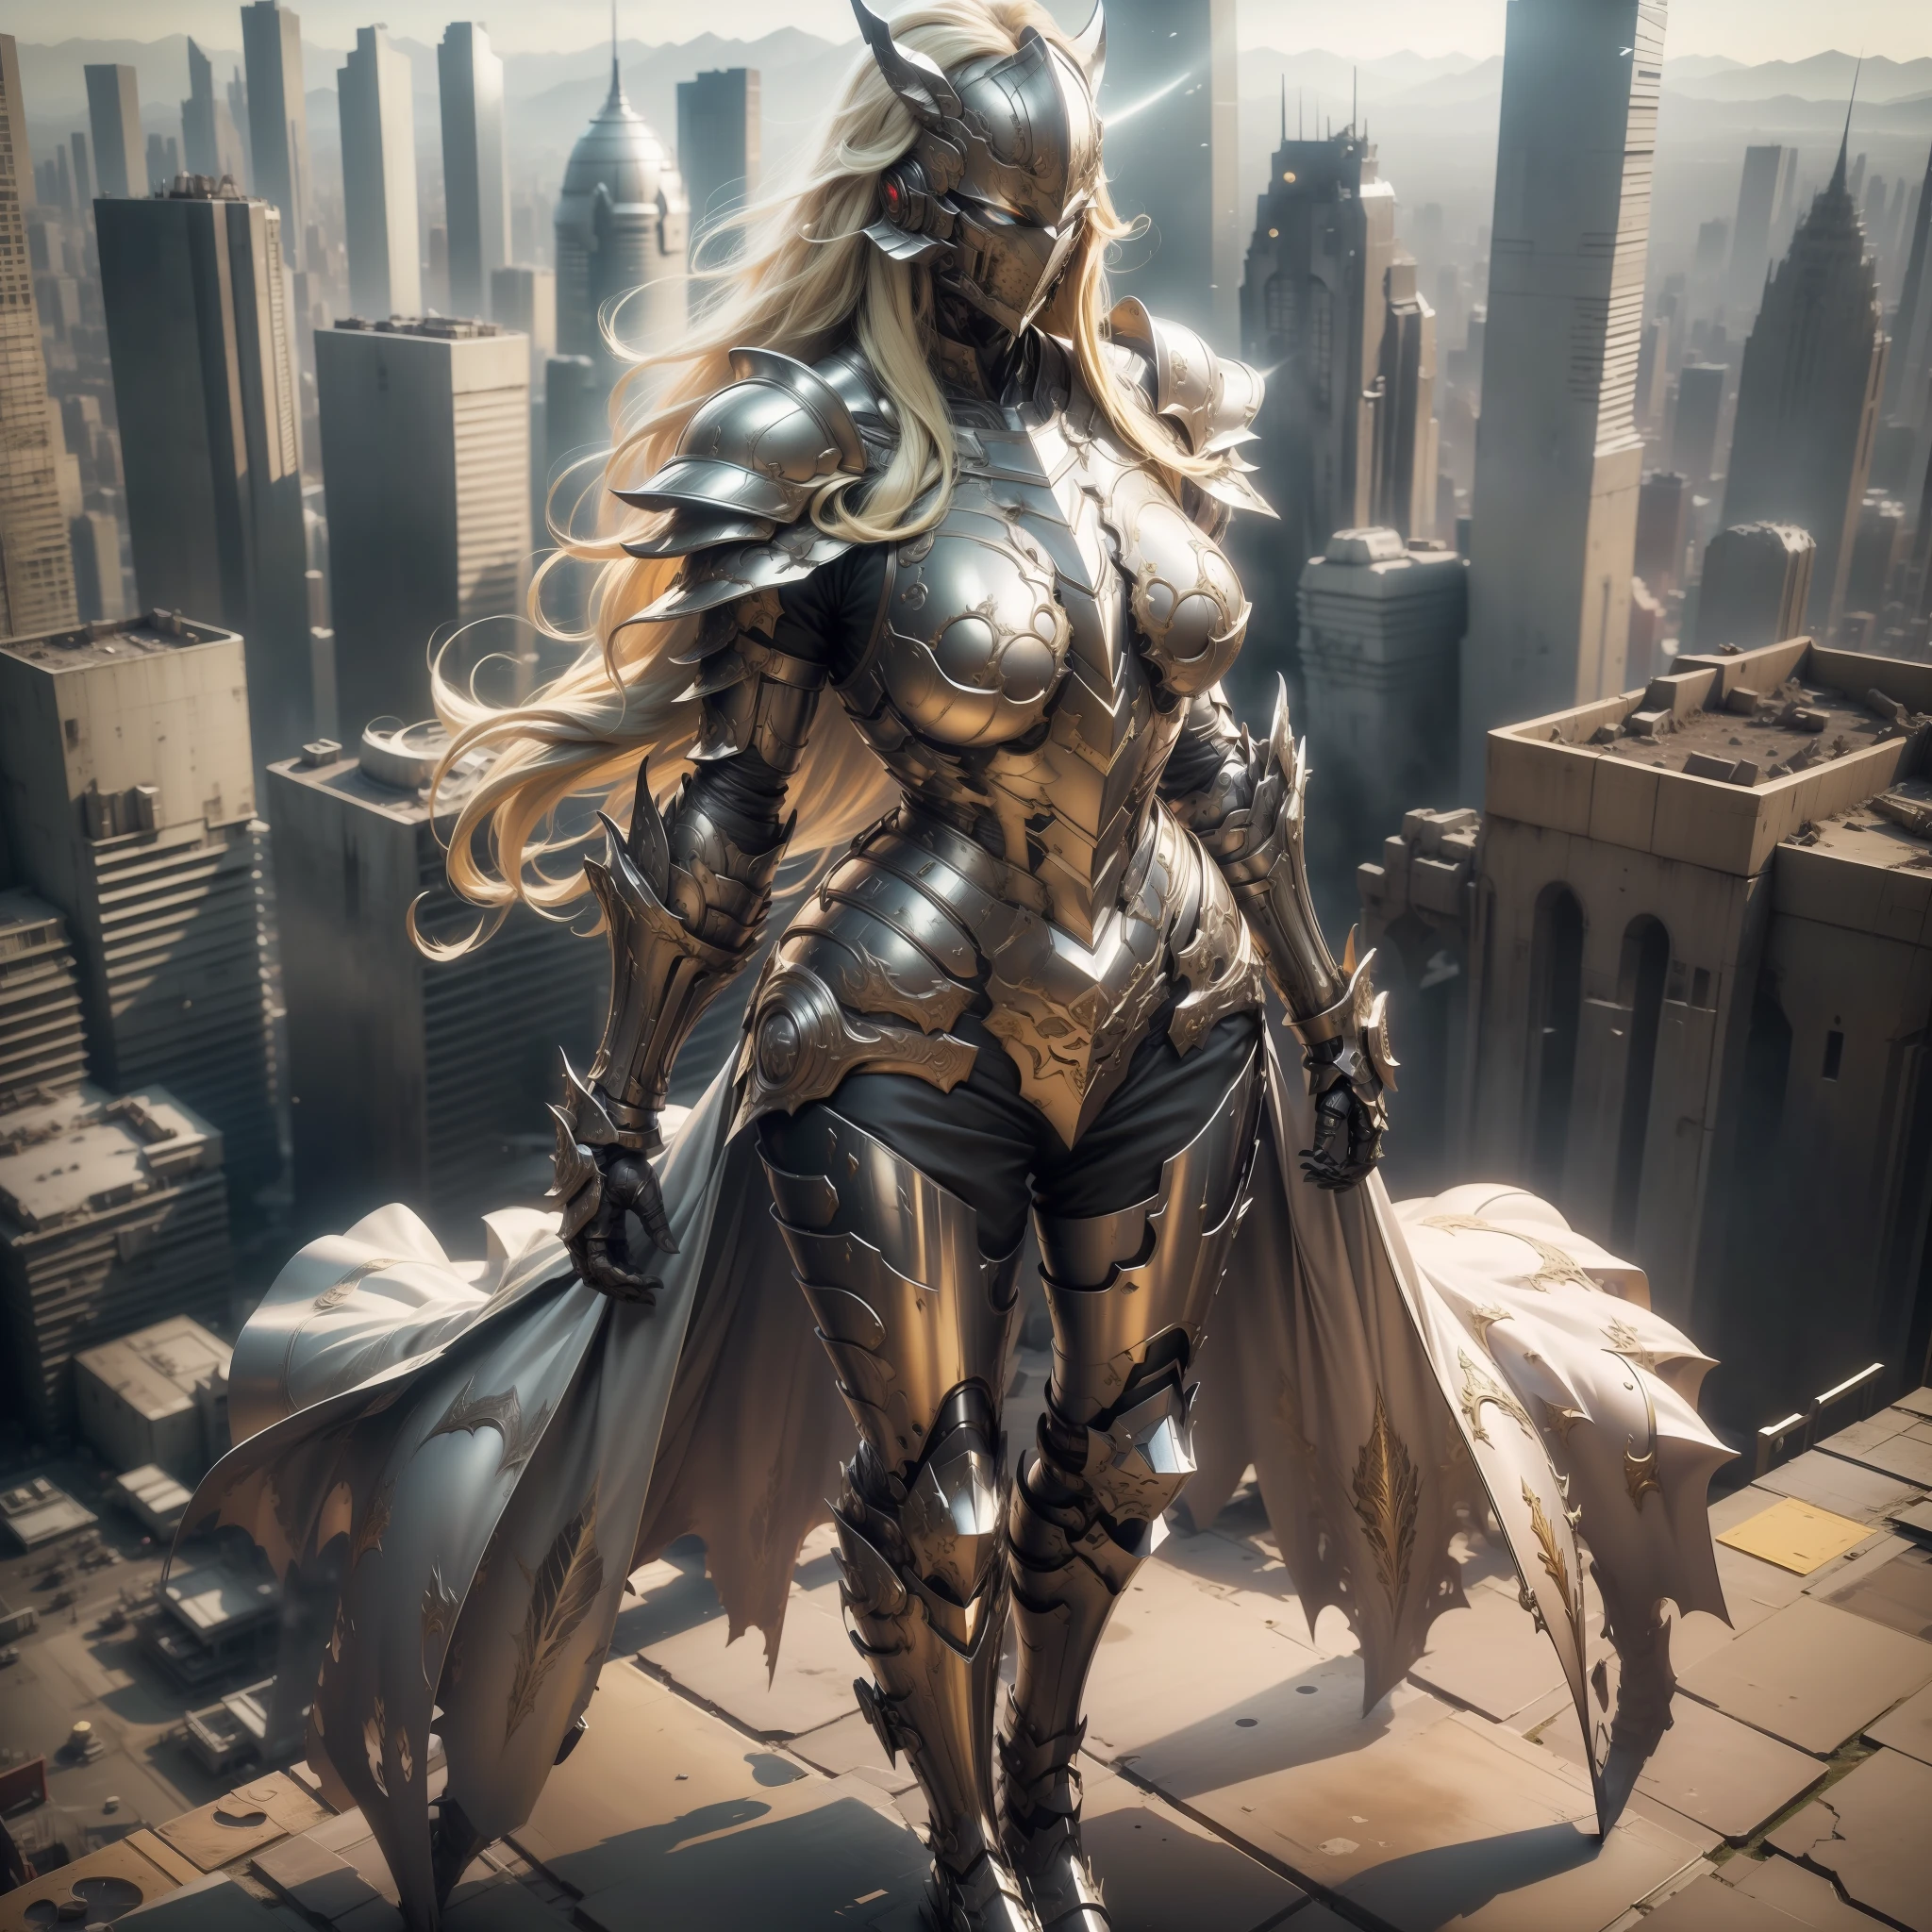 (Masterpiece, Superb Quality, Super Detailed, High Resolution), Male Focus, ((Armor Dress))), (Cloak), (((Mechanized))), (Body Details), (She Has Long Blonde Hair, Big Breasts, Slim), (Standing Pose), Pose for Photo, Top View, City Ruins, Background Details, (((Full Body))), From Above, Solo, (Sense of Greatness)